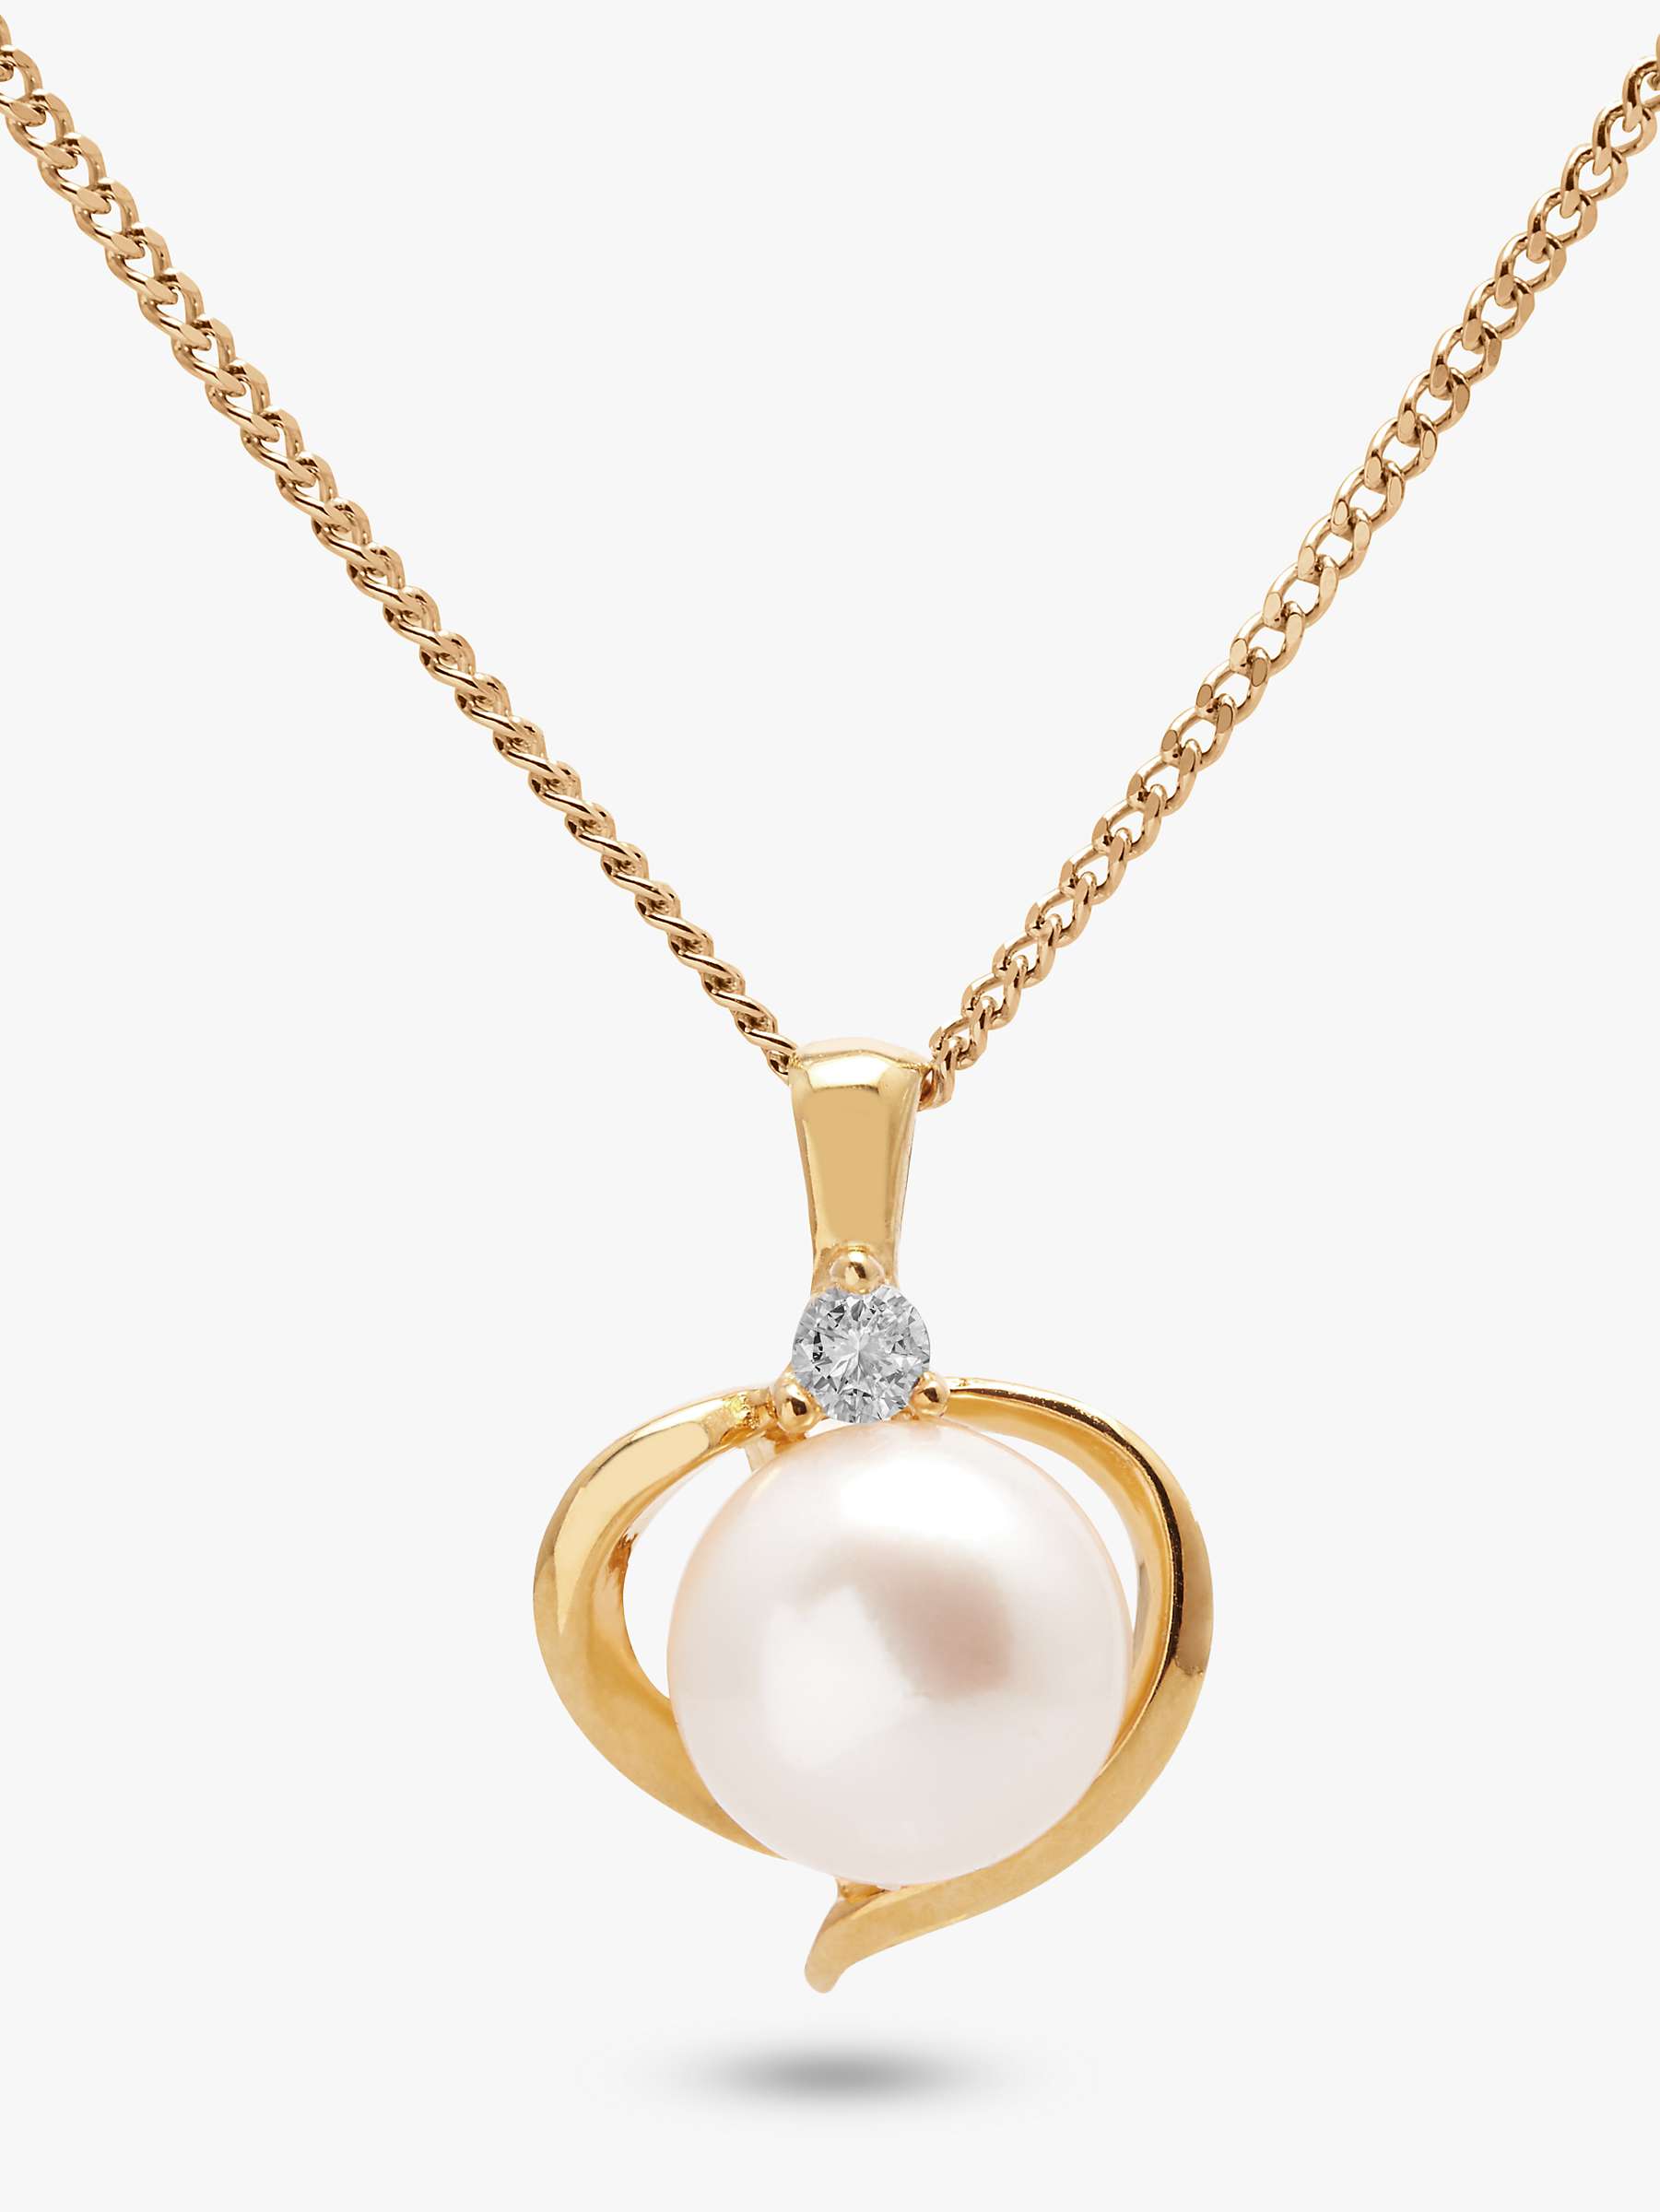 Buy A B Davis 9ct Gold Freshwater Pearl and Topaz Heart Pendant Necklace, Gold Online at johnlewis.com